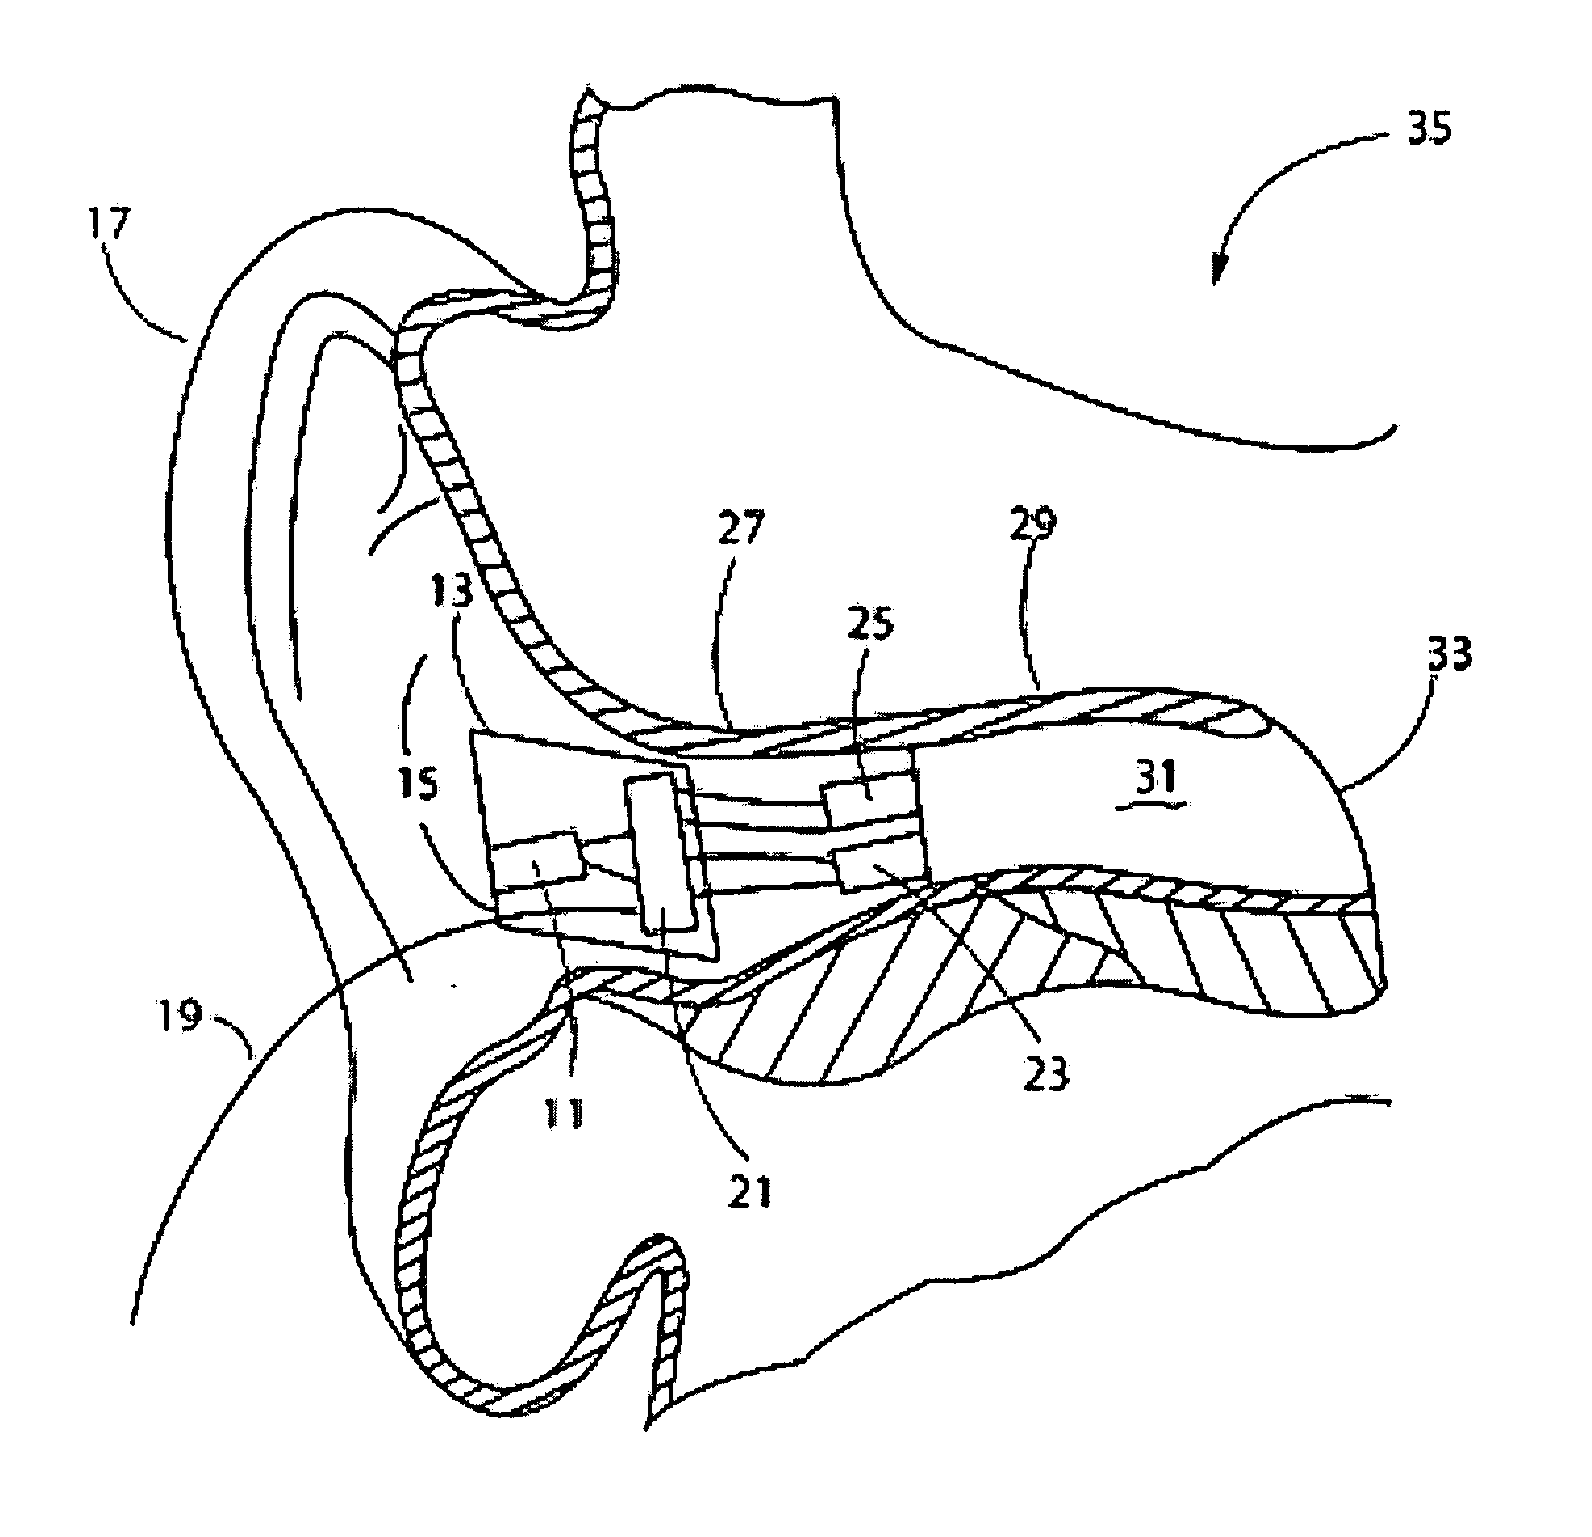 Ear input sound pressure level monitoring system